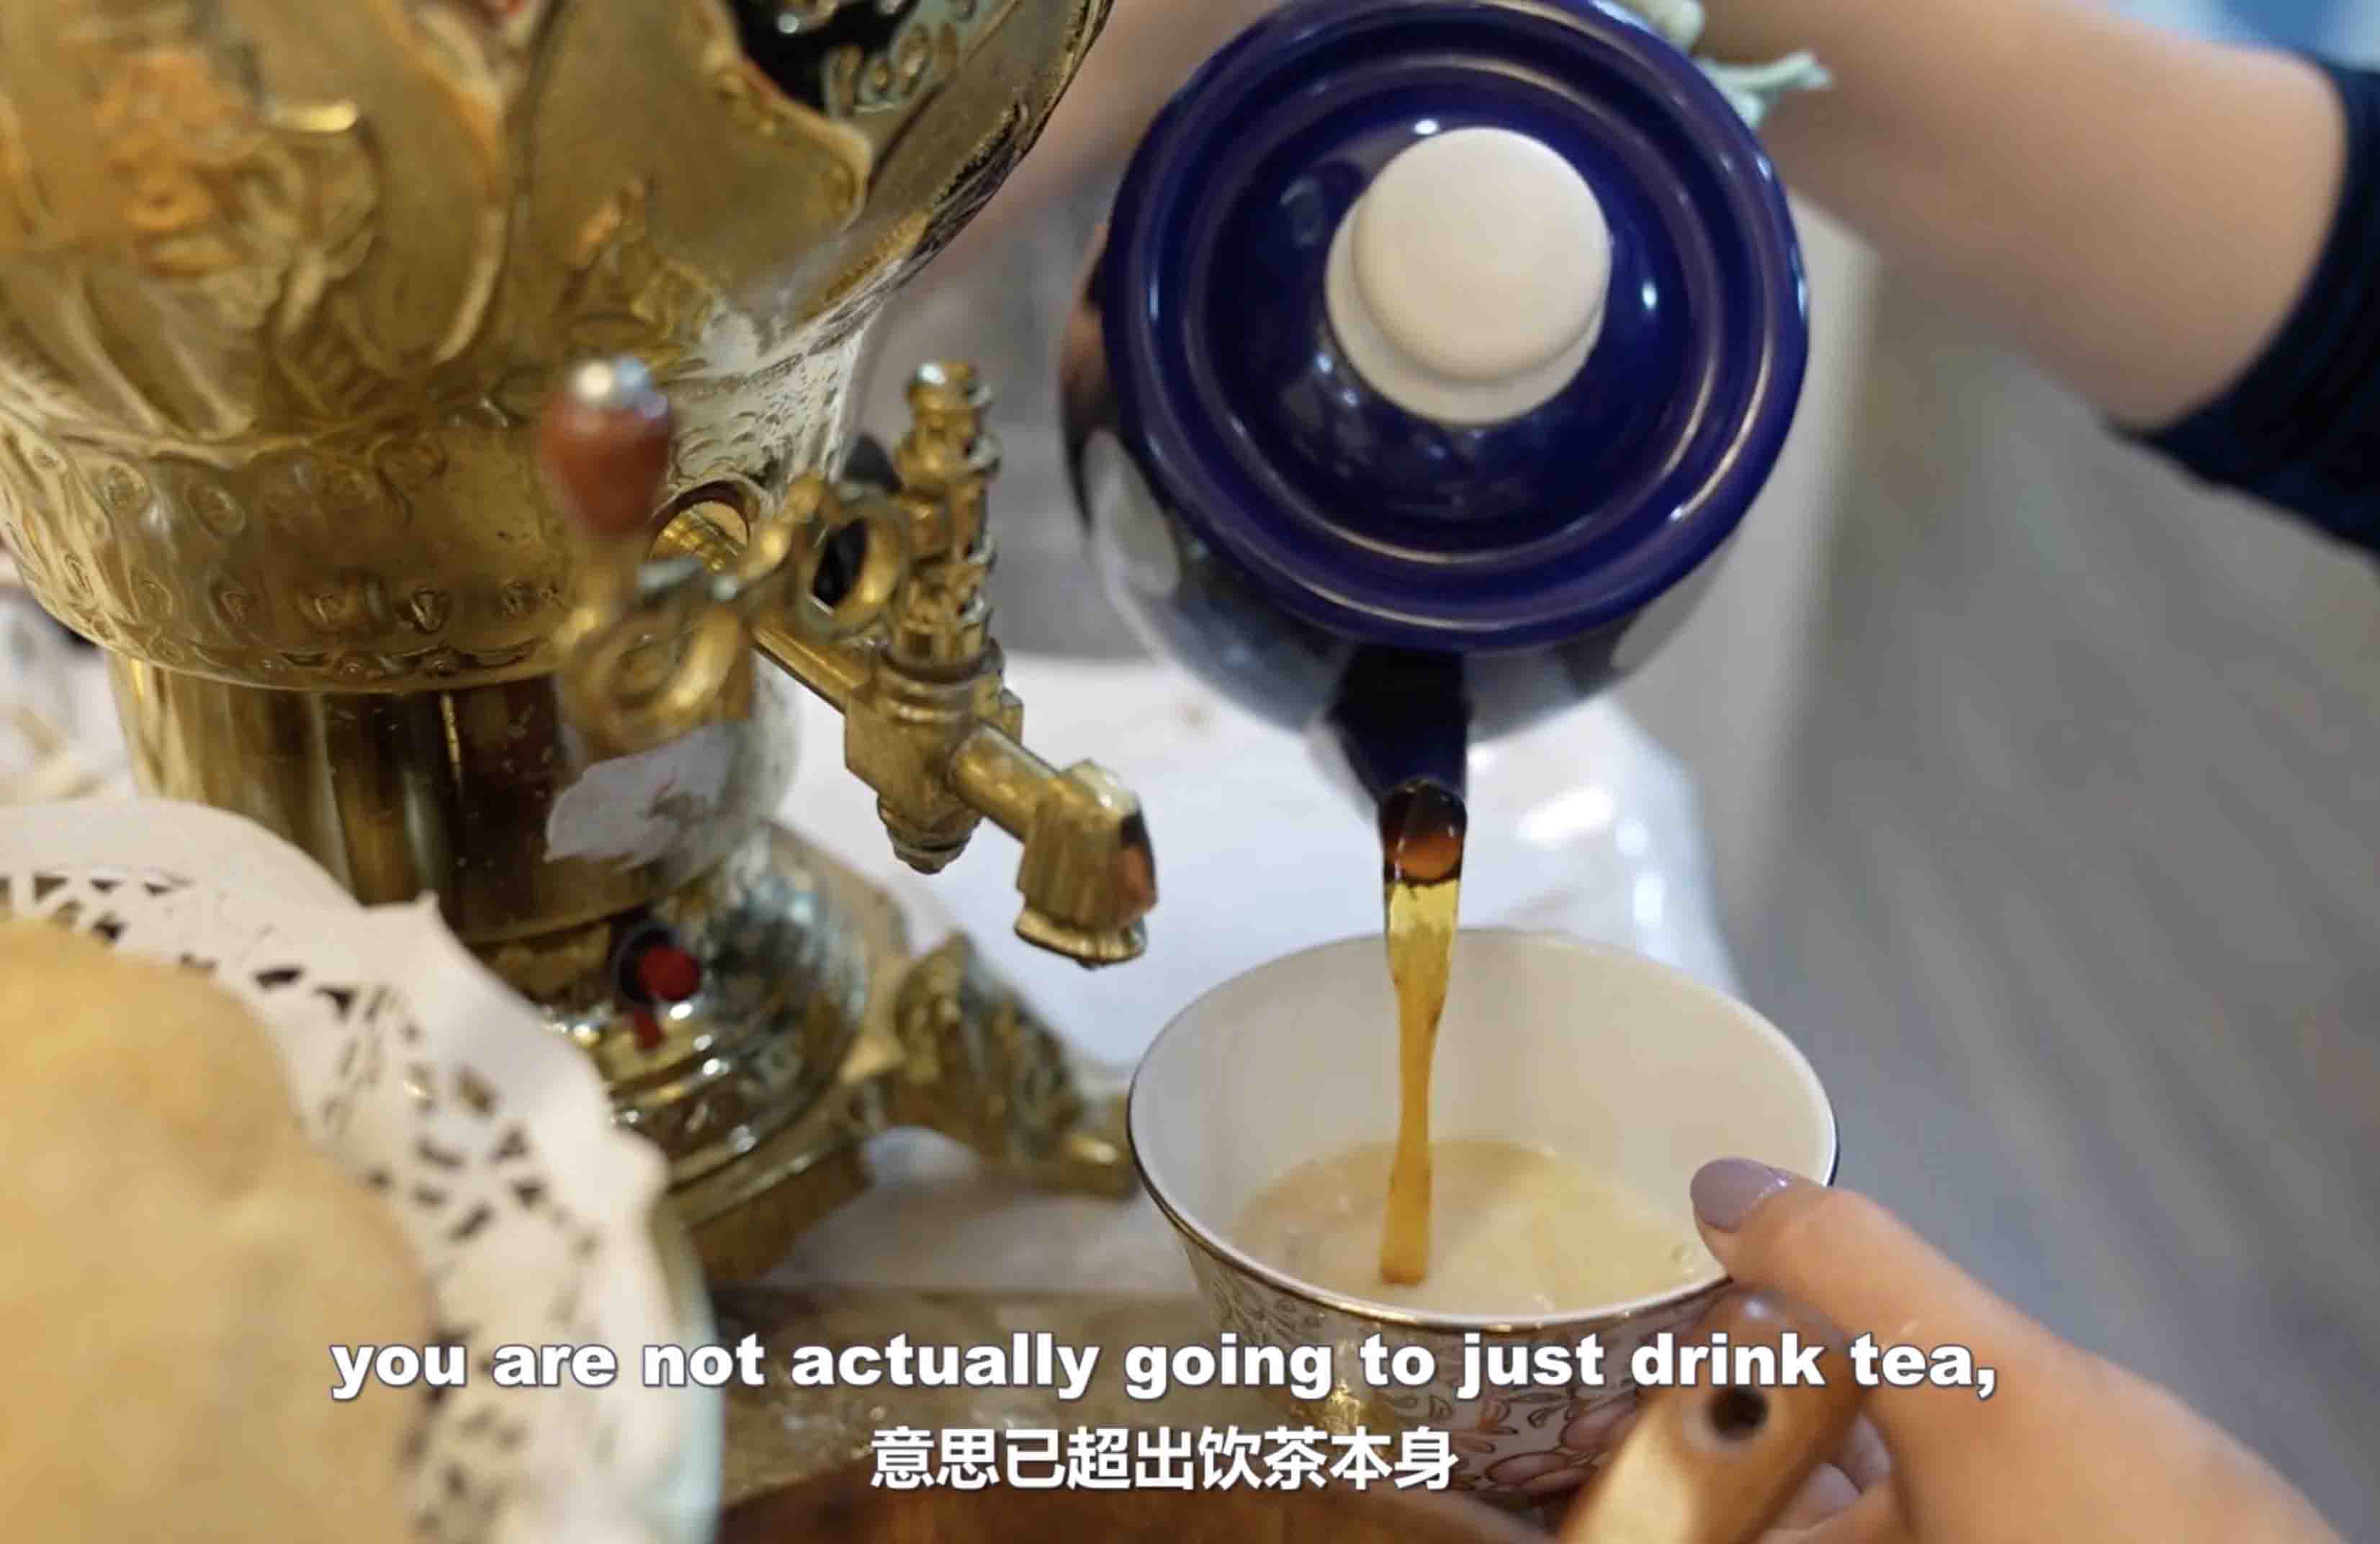 World Meets Chinese Tea Culture | Stove-boiled tea - An important part of Kazakhs' daily routine